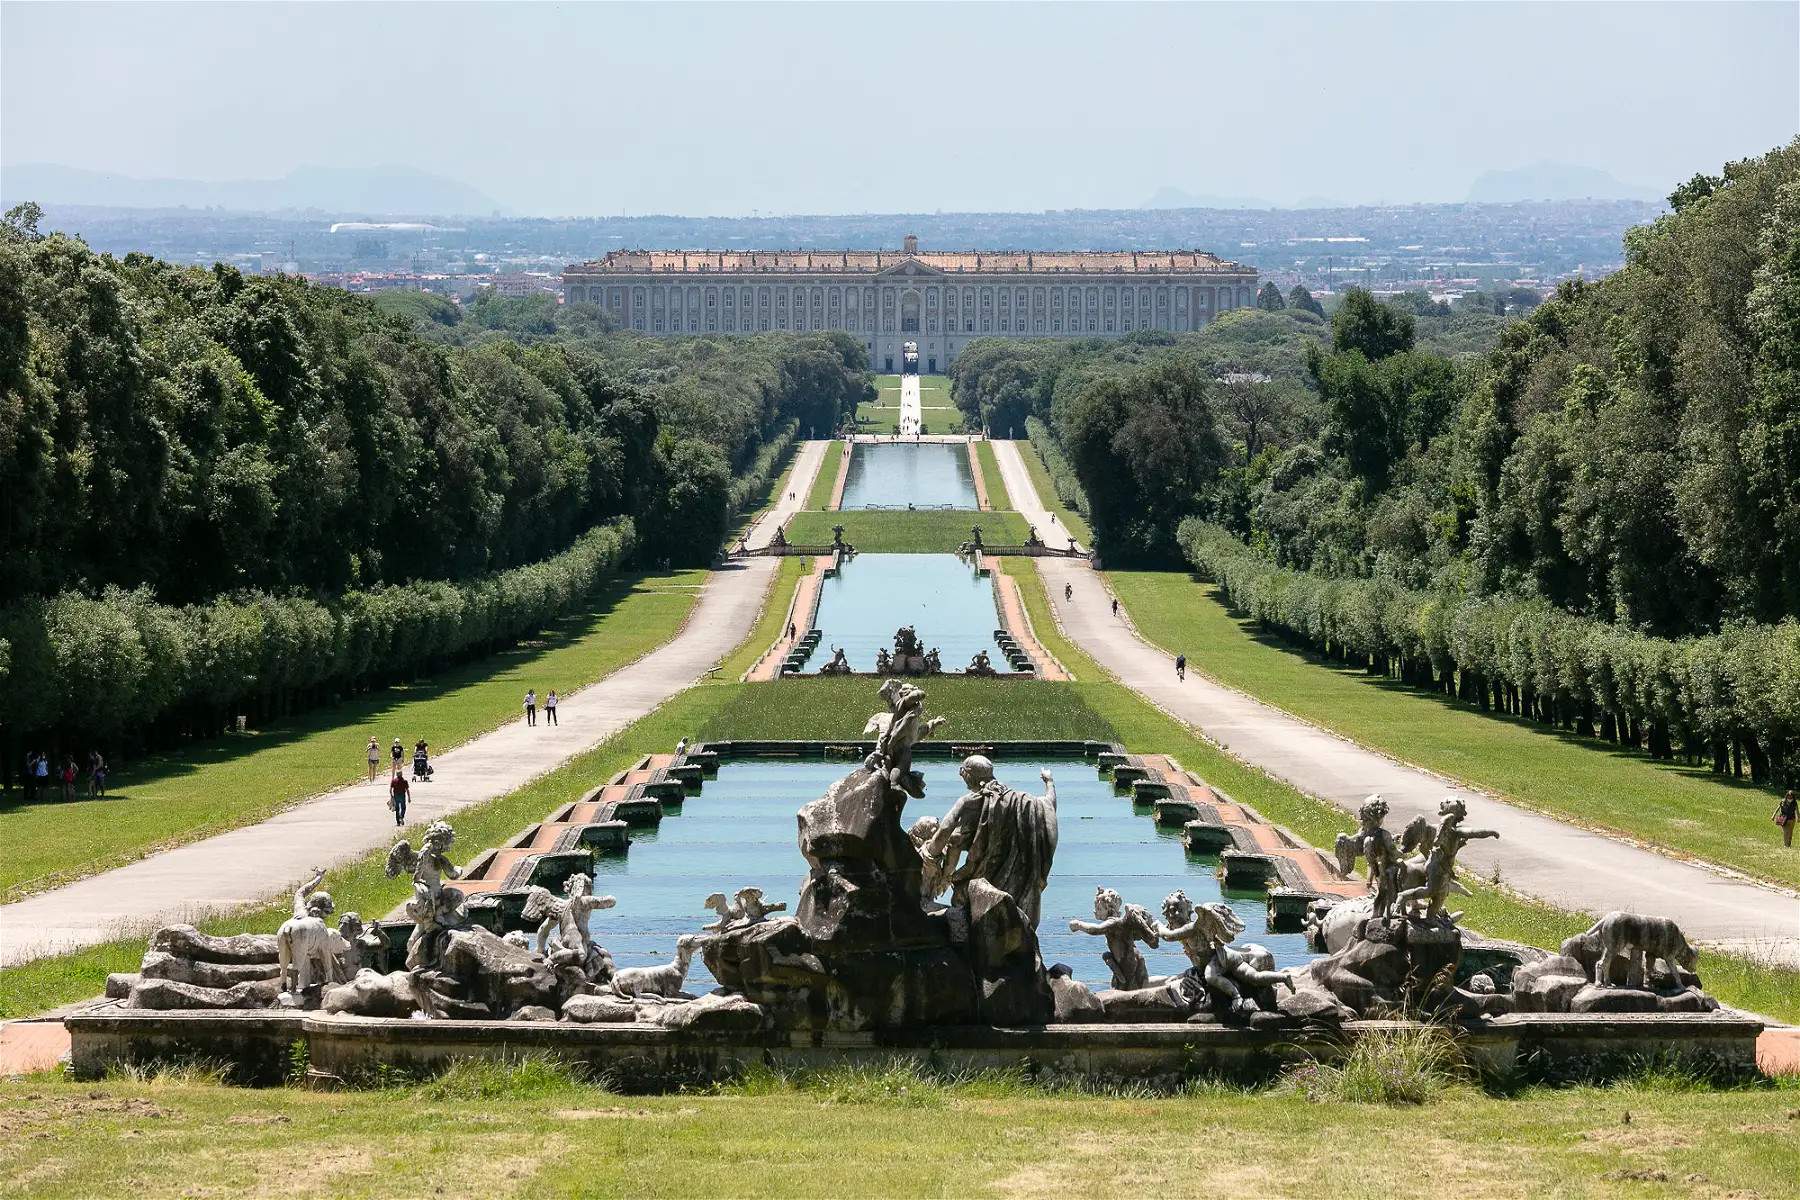 Royal Palace of Caserta, northwest wing of the royal palace opens to the public. An additional 3,000 square meters can be visited 